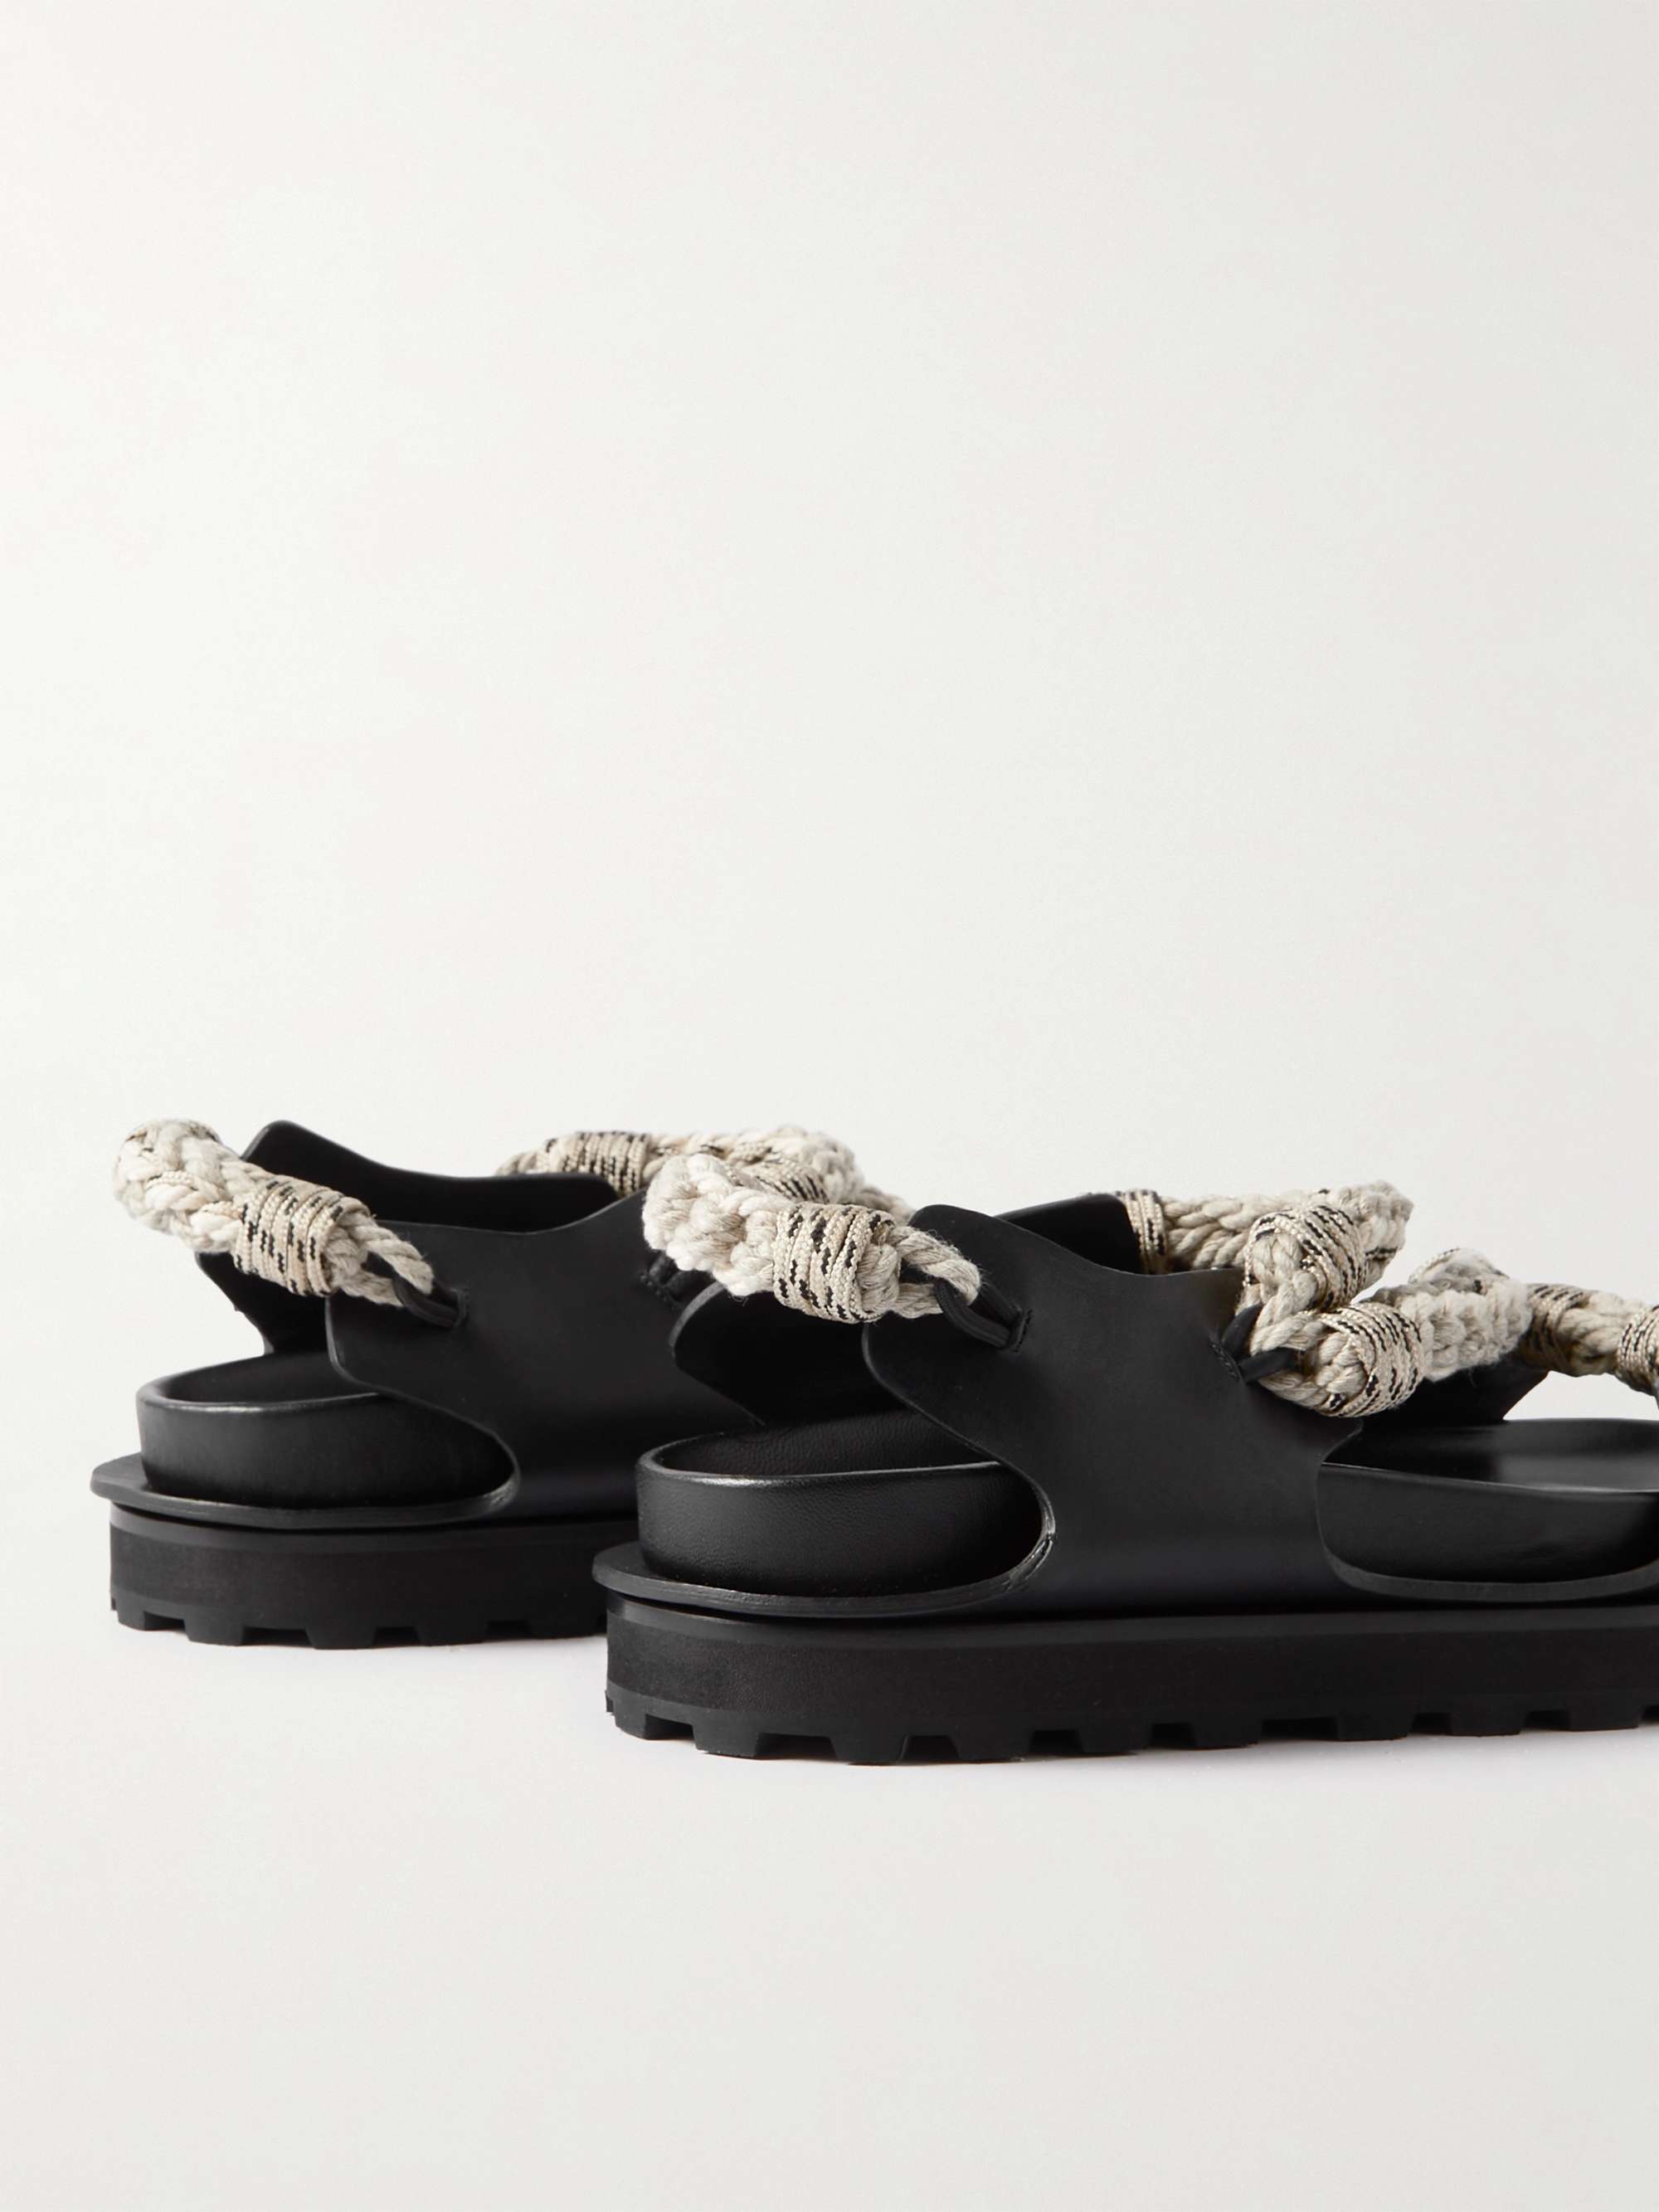 JIL SANDER Leather and Rope Sandals